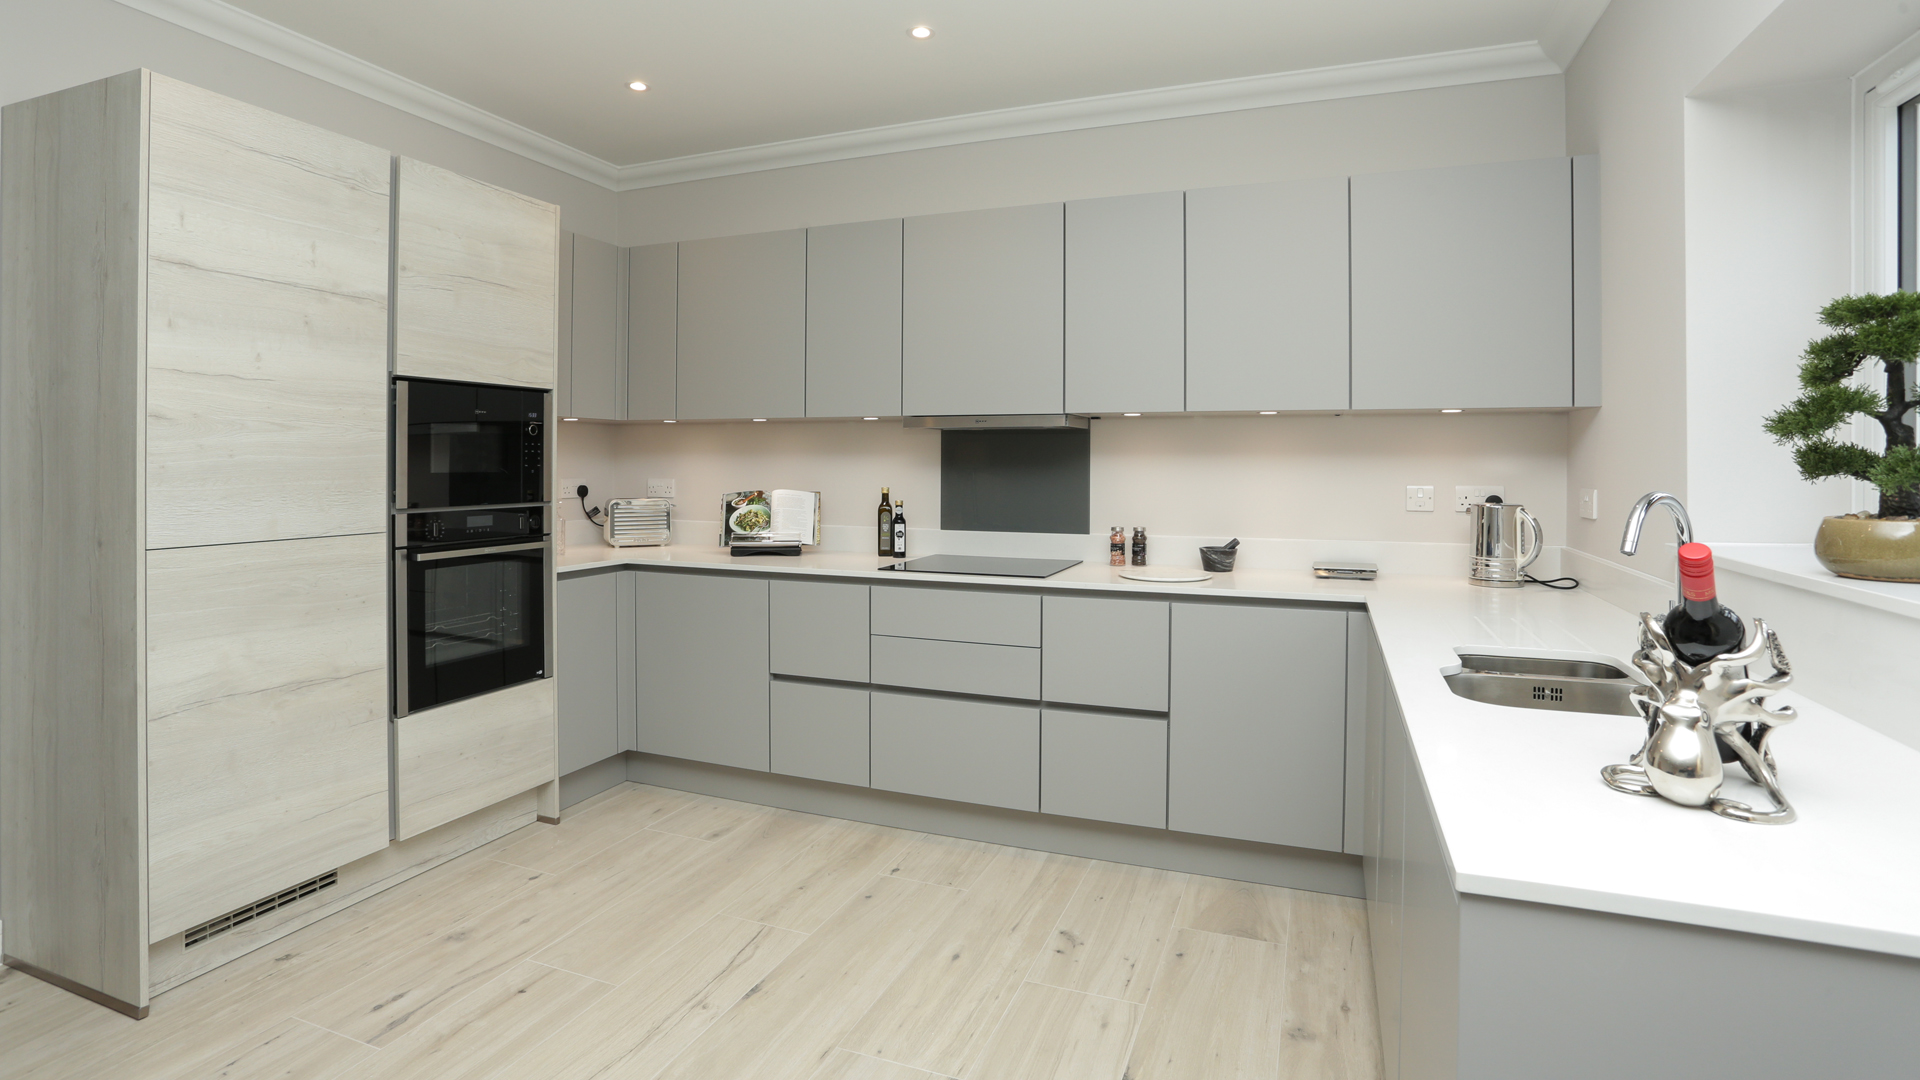 Cobnut Park plot 6 kitchen with grey cupboards and a hardwood floor.